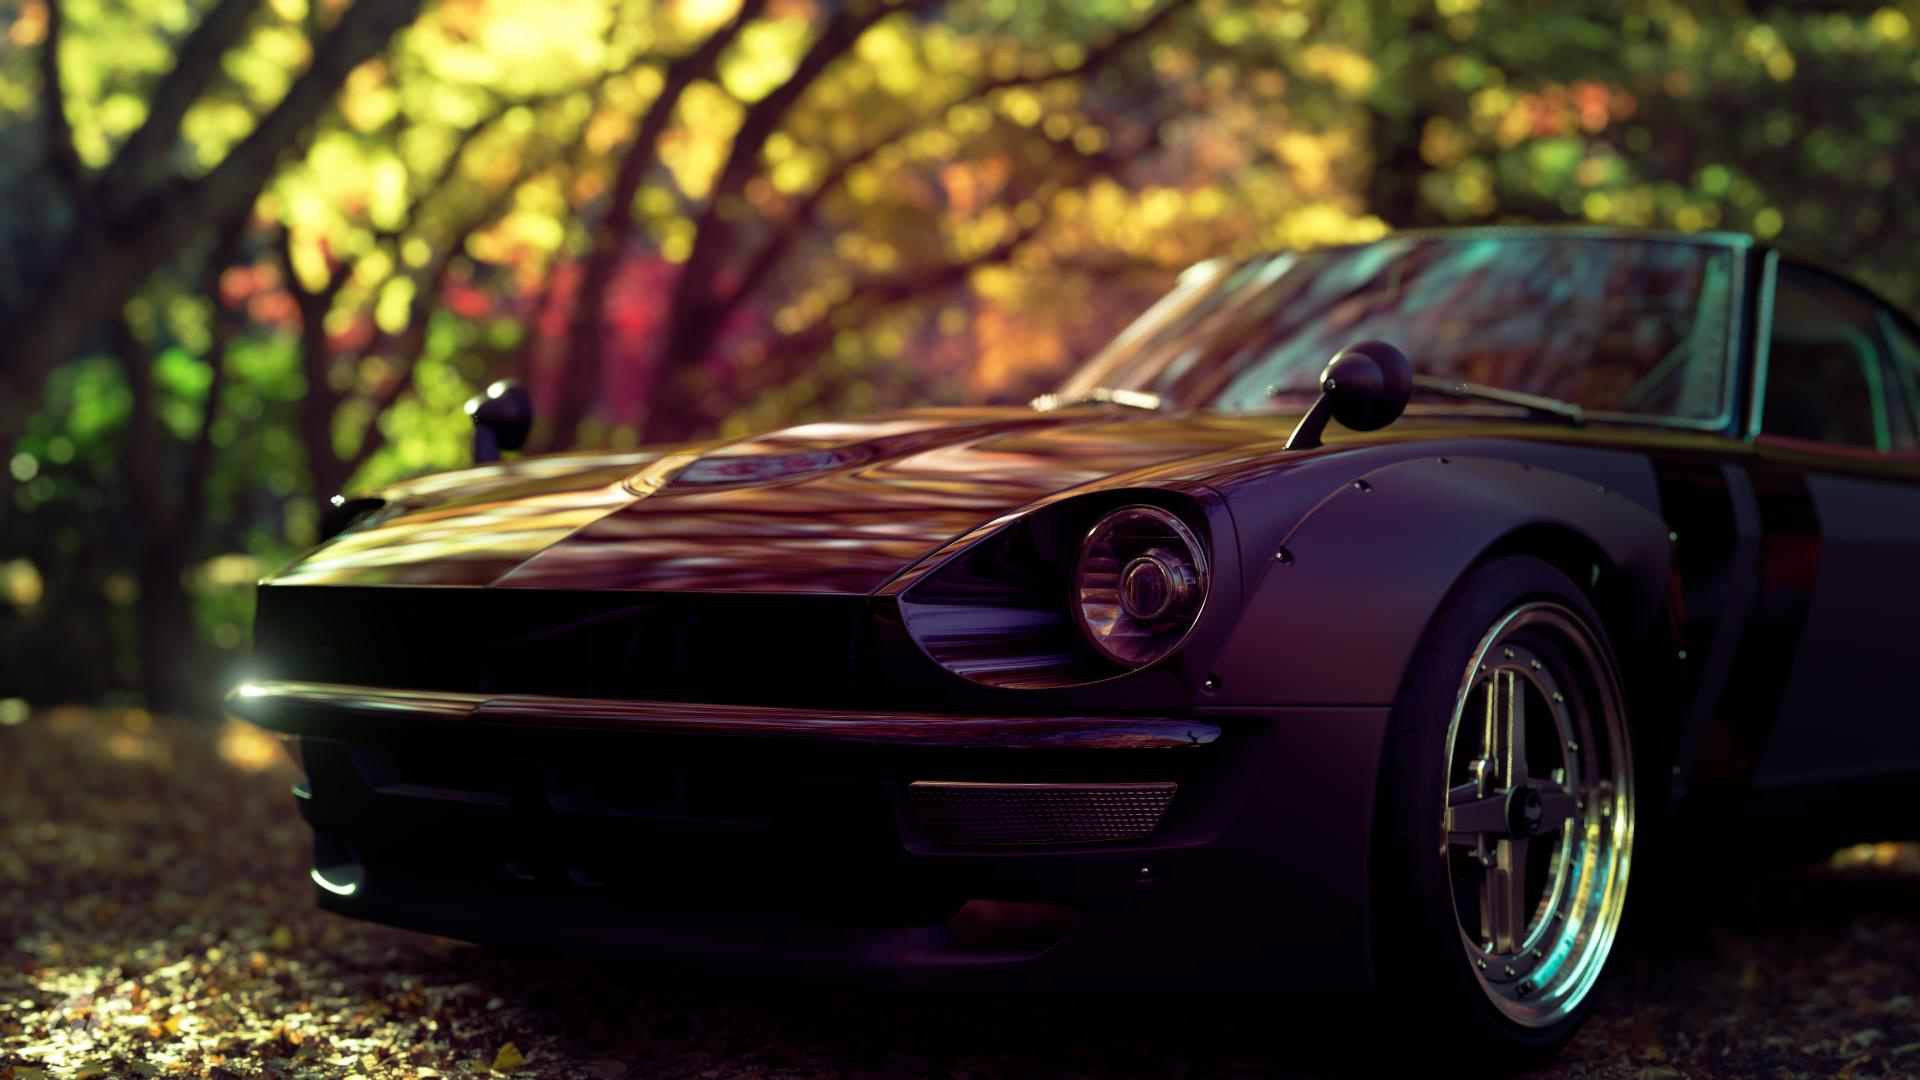 Datsun 240Z, Racing heritage, Speed and style, Automotive passion, 1920x1080 Full HD Desktop